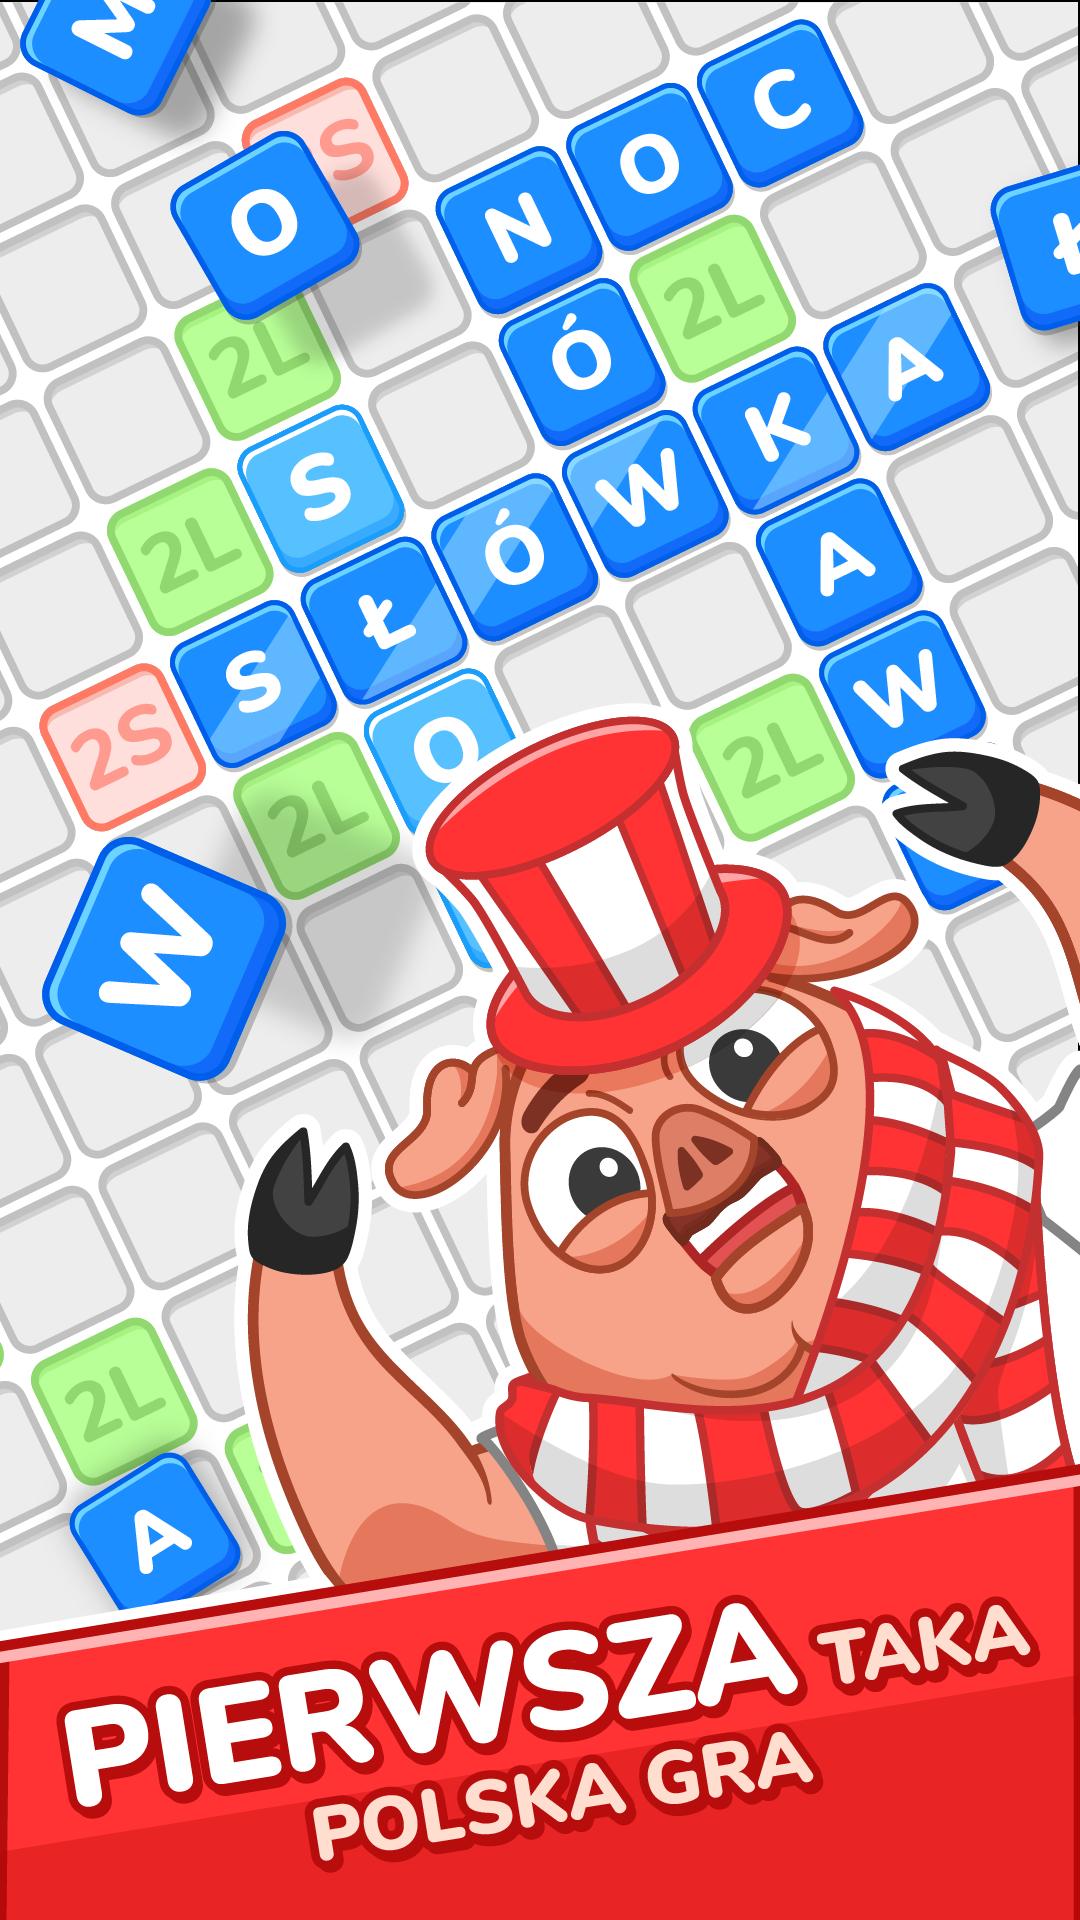 Pigsty - Arena Gier for Android - APK Download